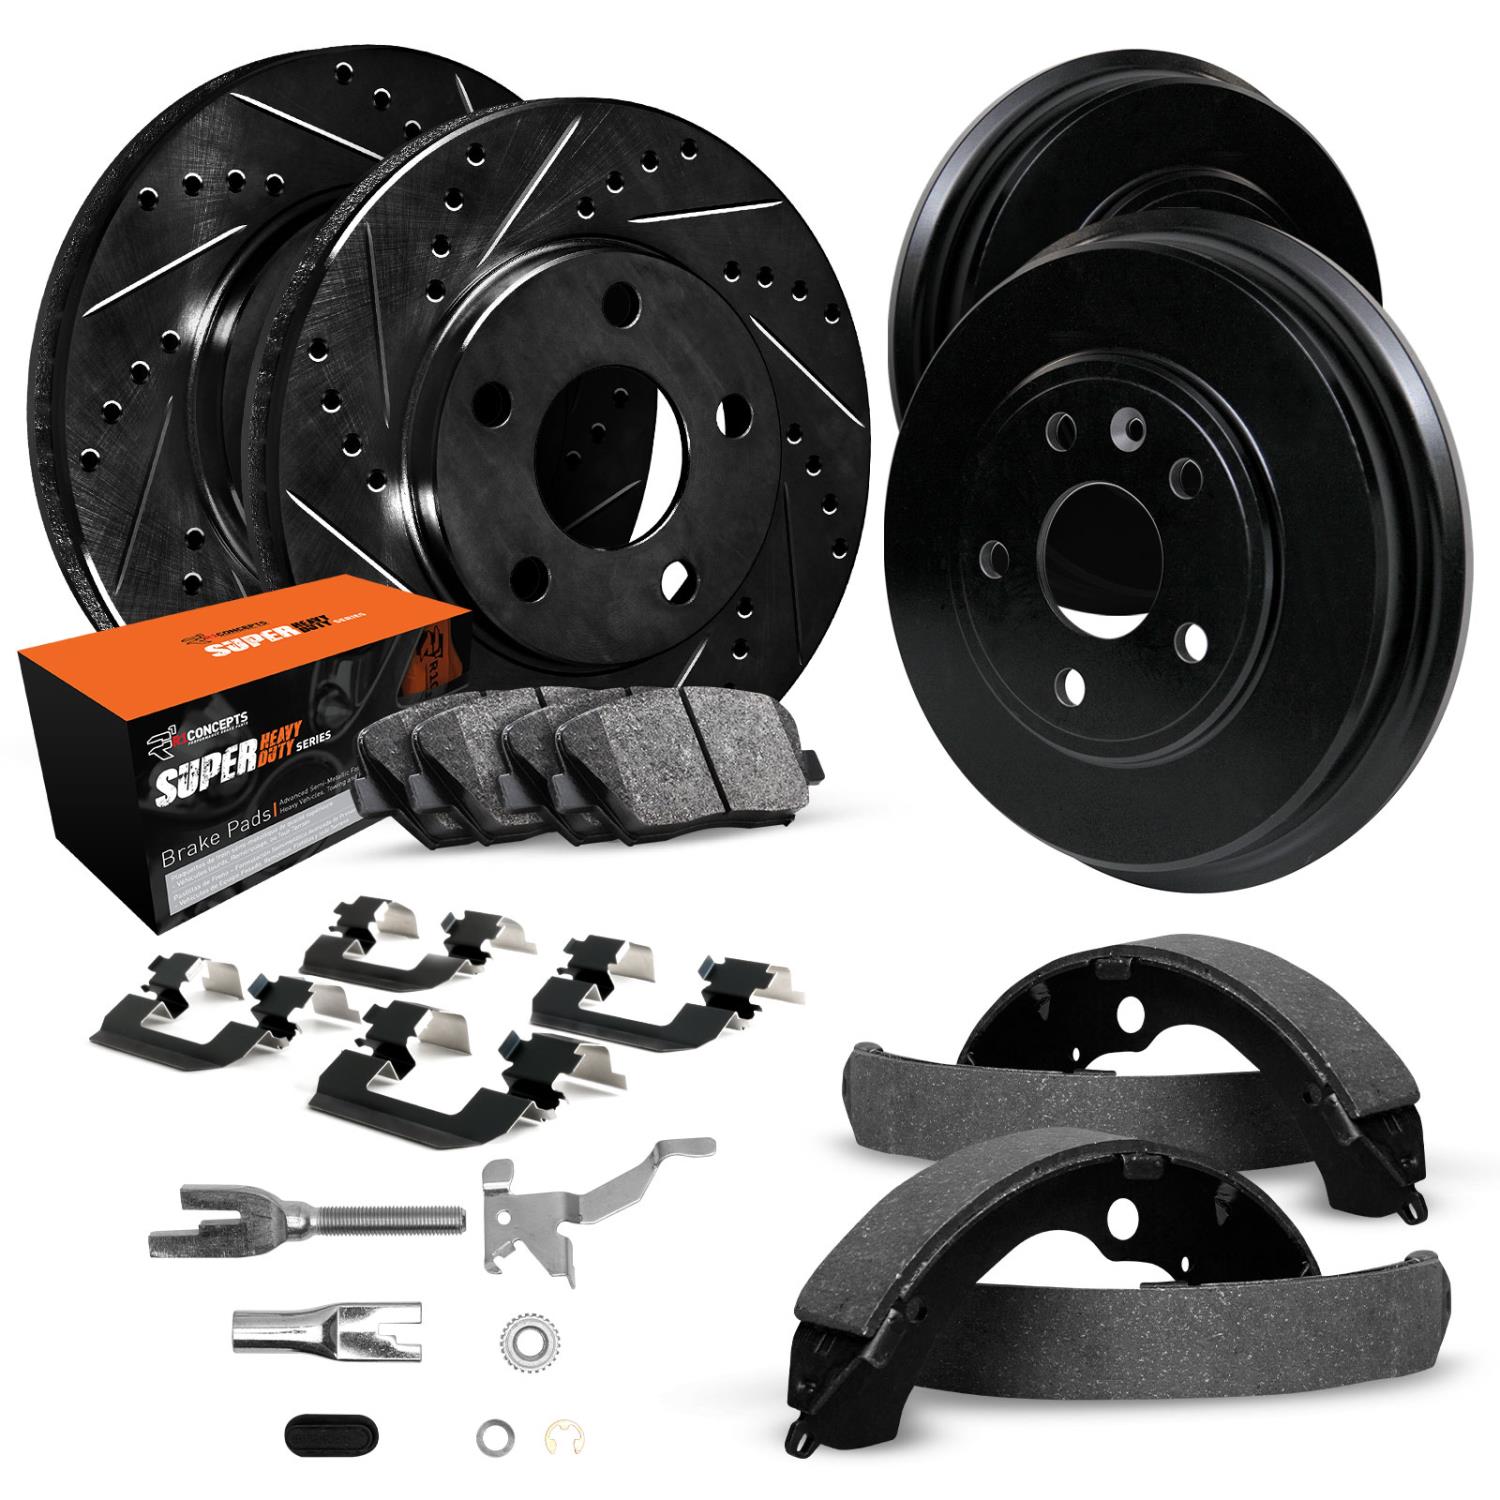 E-Line Slotted Black Brake Rotor & Drum Set w/Super-Duty Pads, Shoes, Hardware/Adjusters, 1999-2003 Ford/Lincoln/Mercury/Mazda